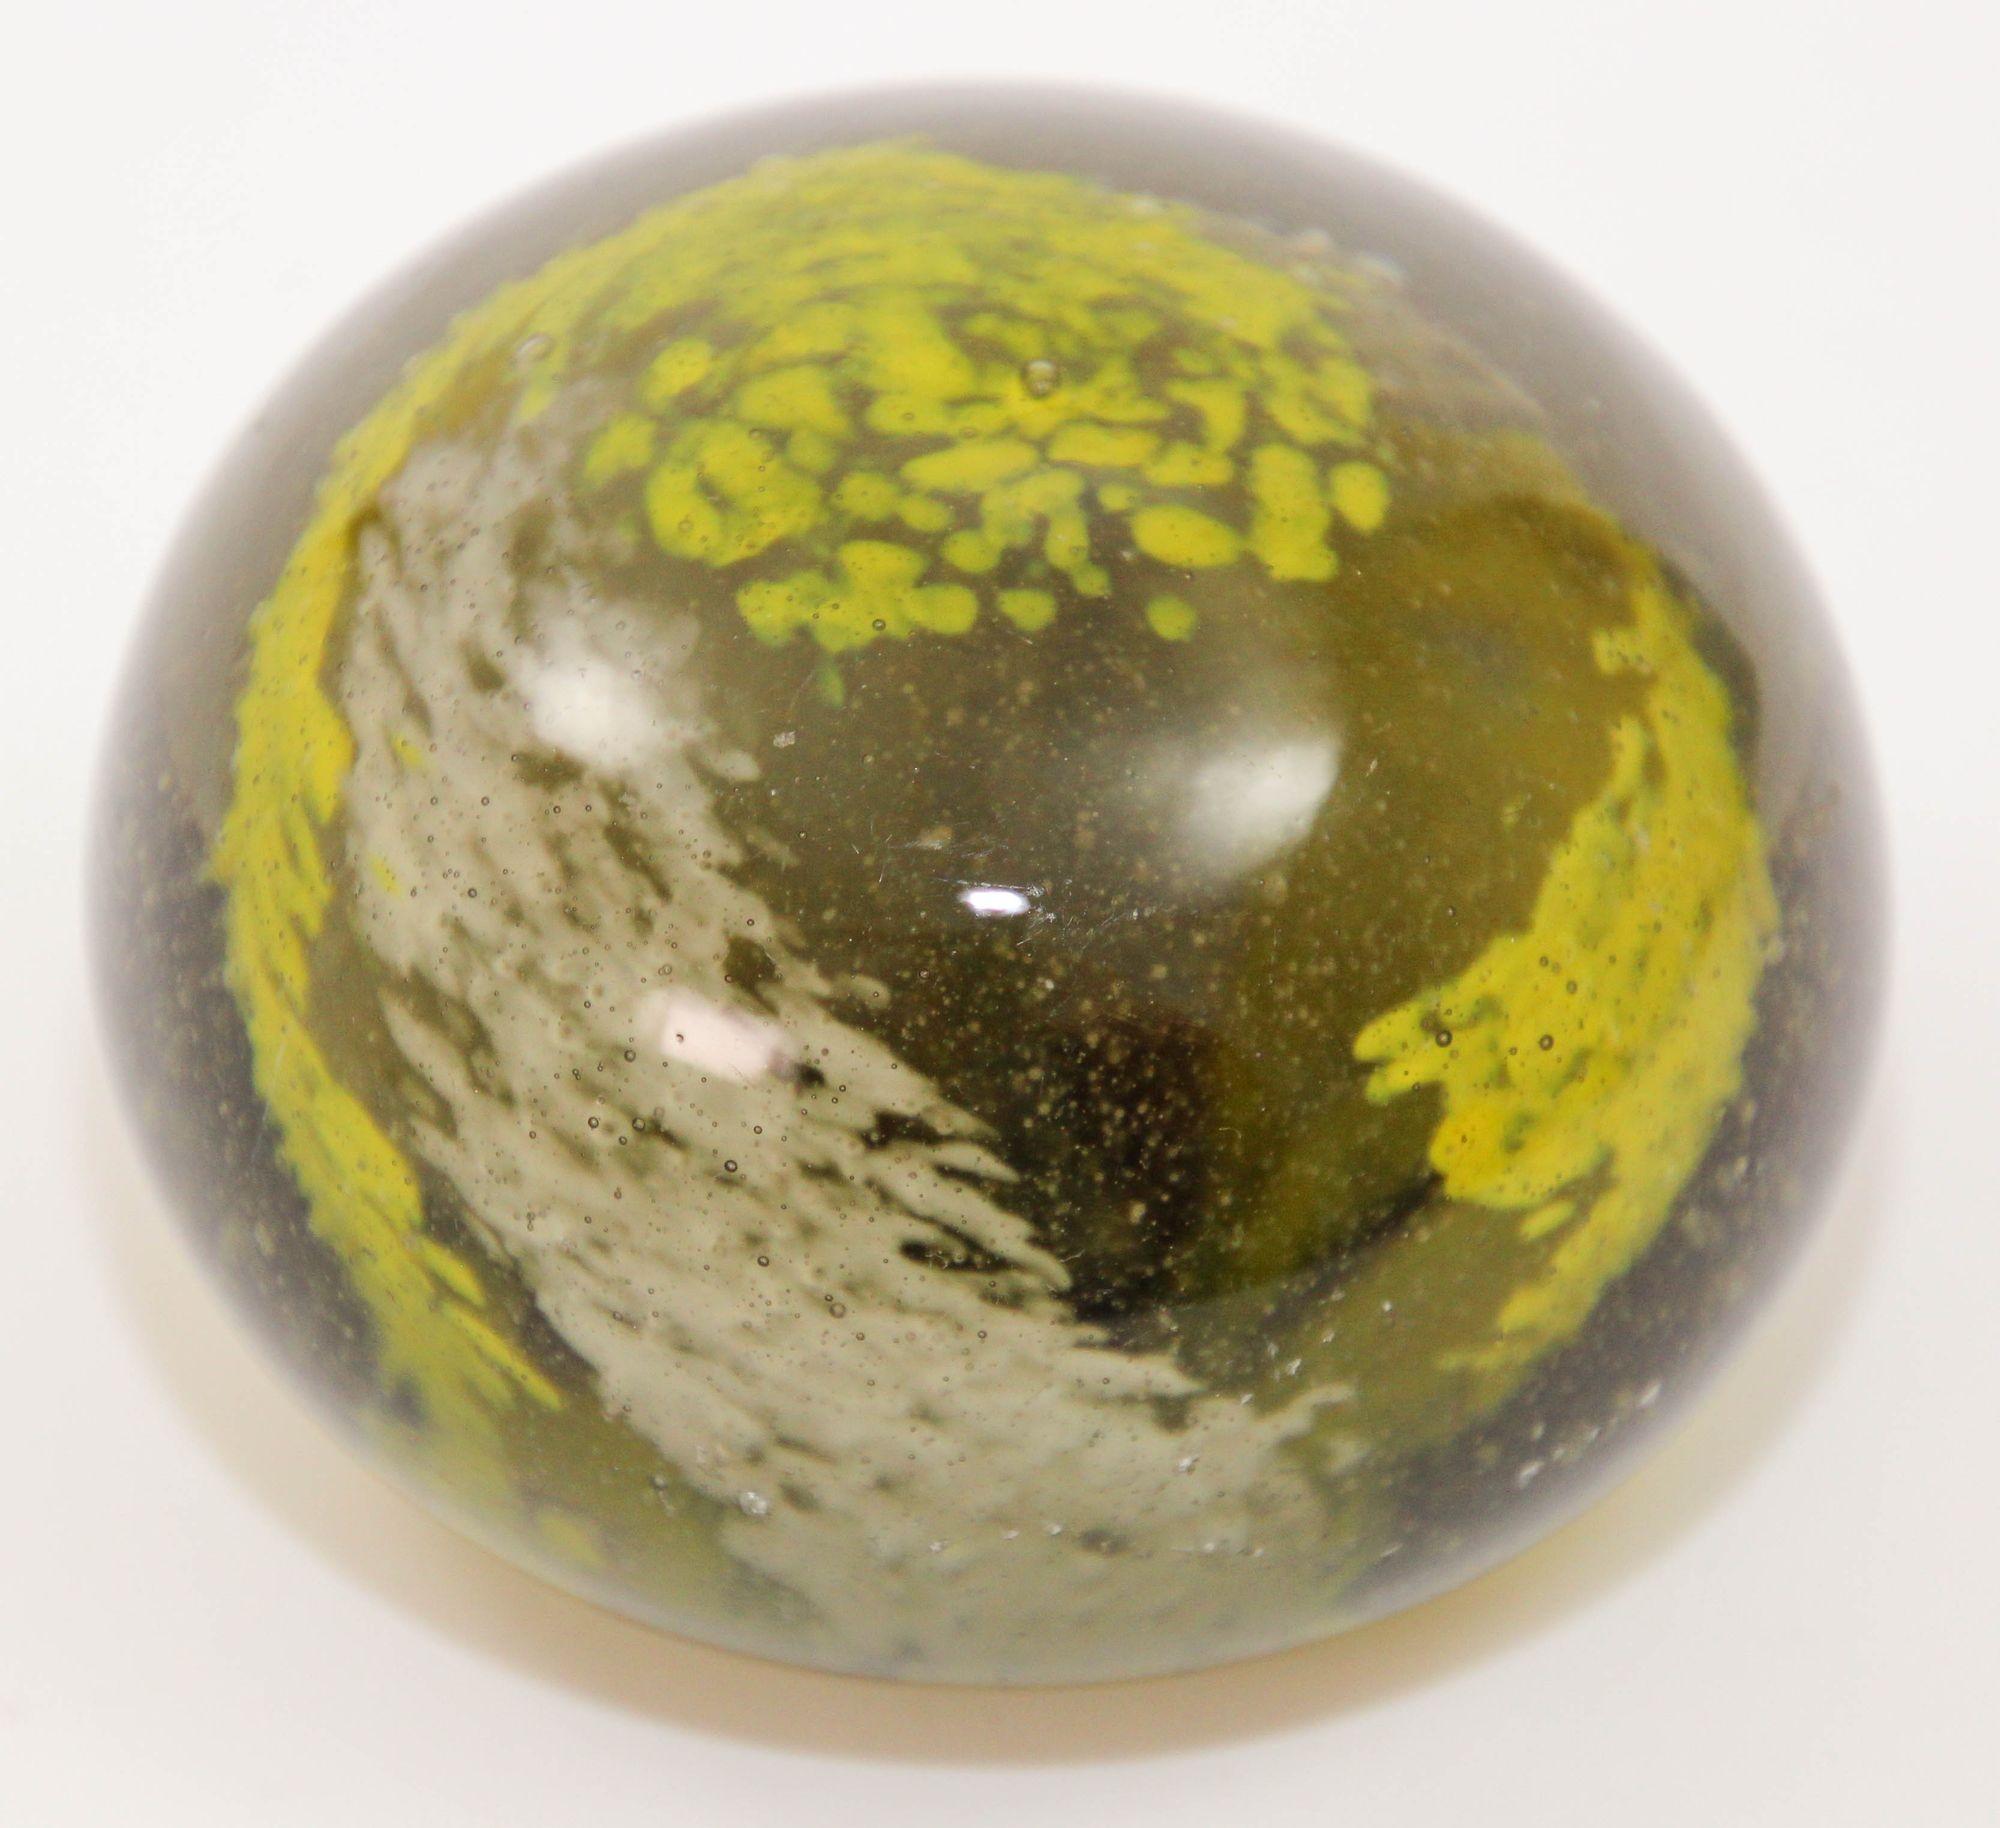 Vintage Kerry art glass paperweight hand blown in dark olive green, yellow and white colors with small bubbles.
Hand crafted in Ireland, circa 1980s.
No Hallmark.
Measures: diameter 3 inches, height 2.25 inches.